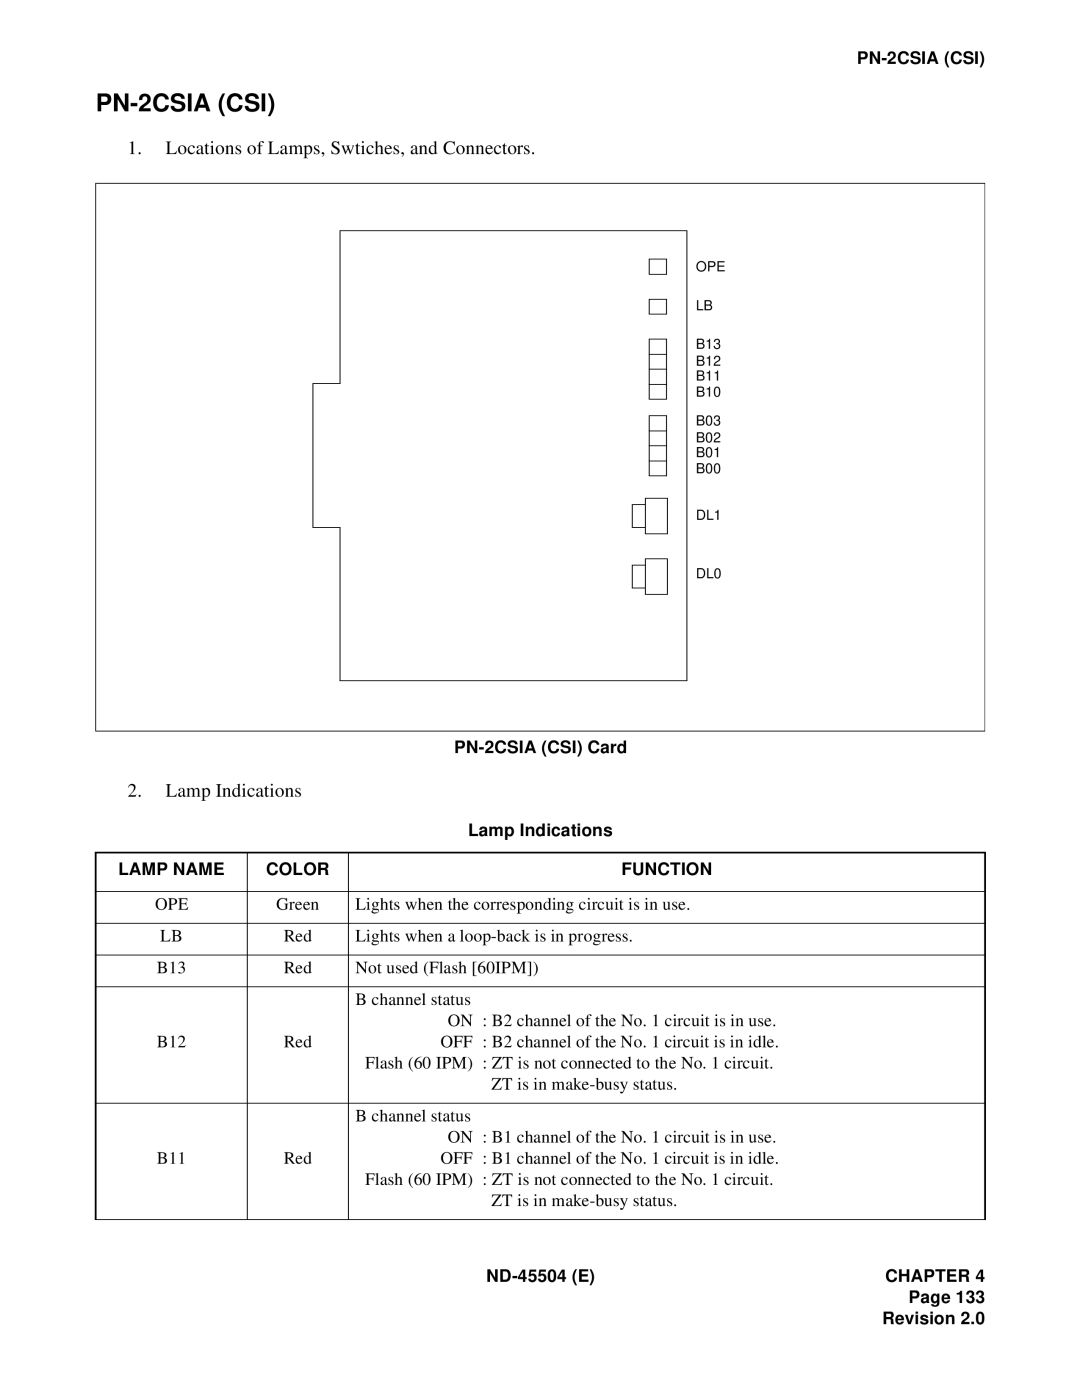 NEC 2000 IVS manual PN-2CSIACSI, Locations of Lamps, Swtiches, and Connectors, Lamp Indications 